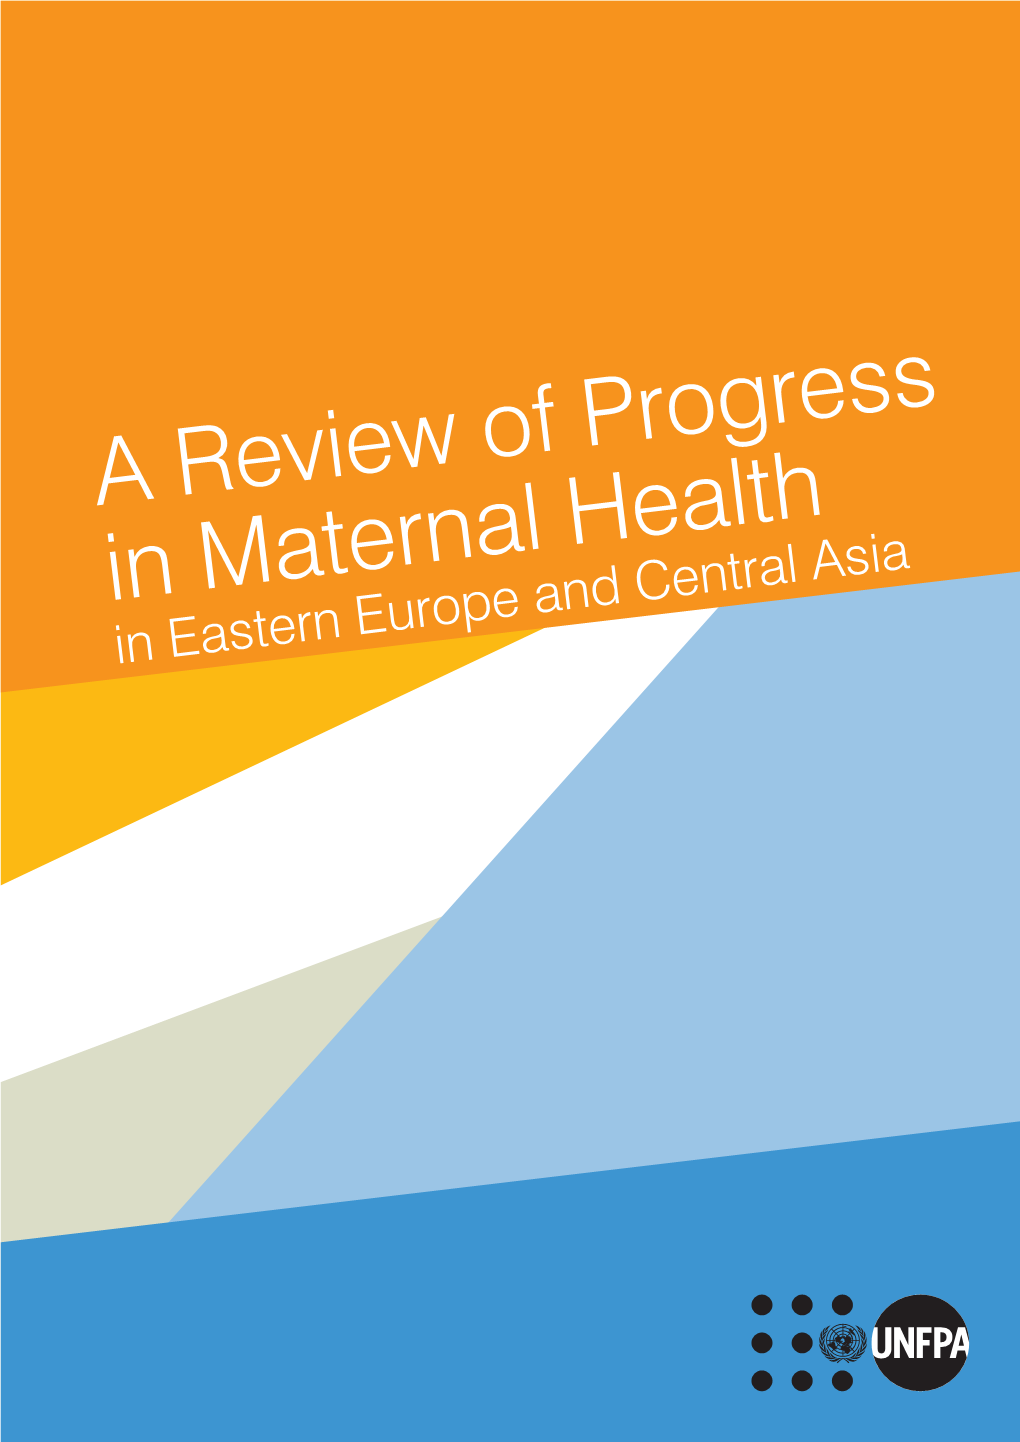 A Review of Progress in Maternal Health in Eastern Europe and Central Asia